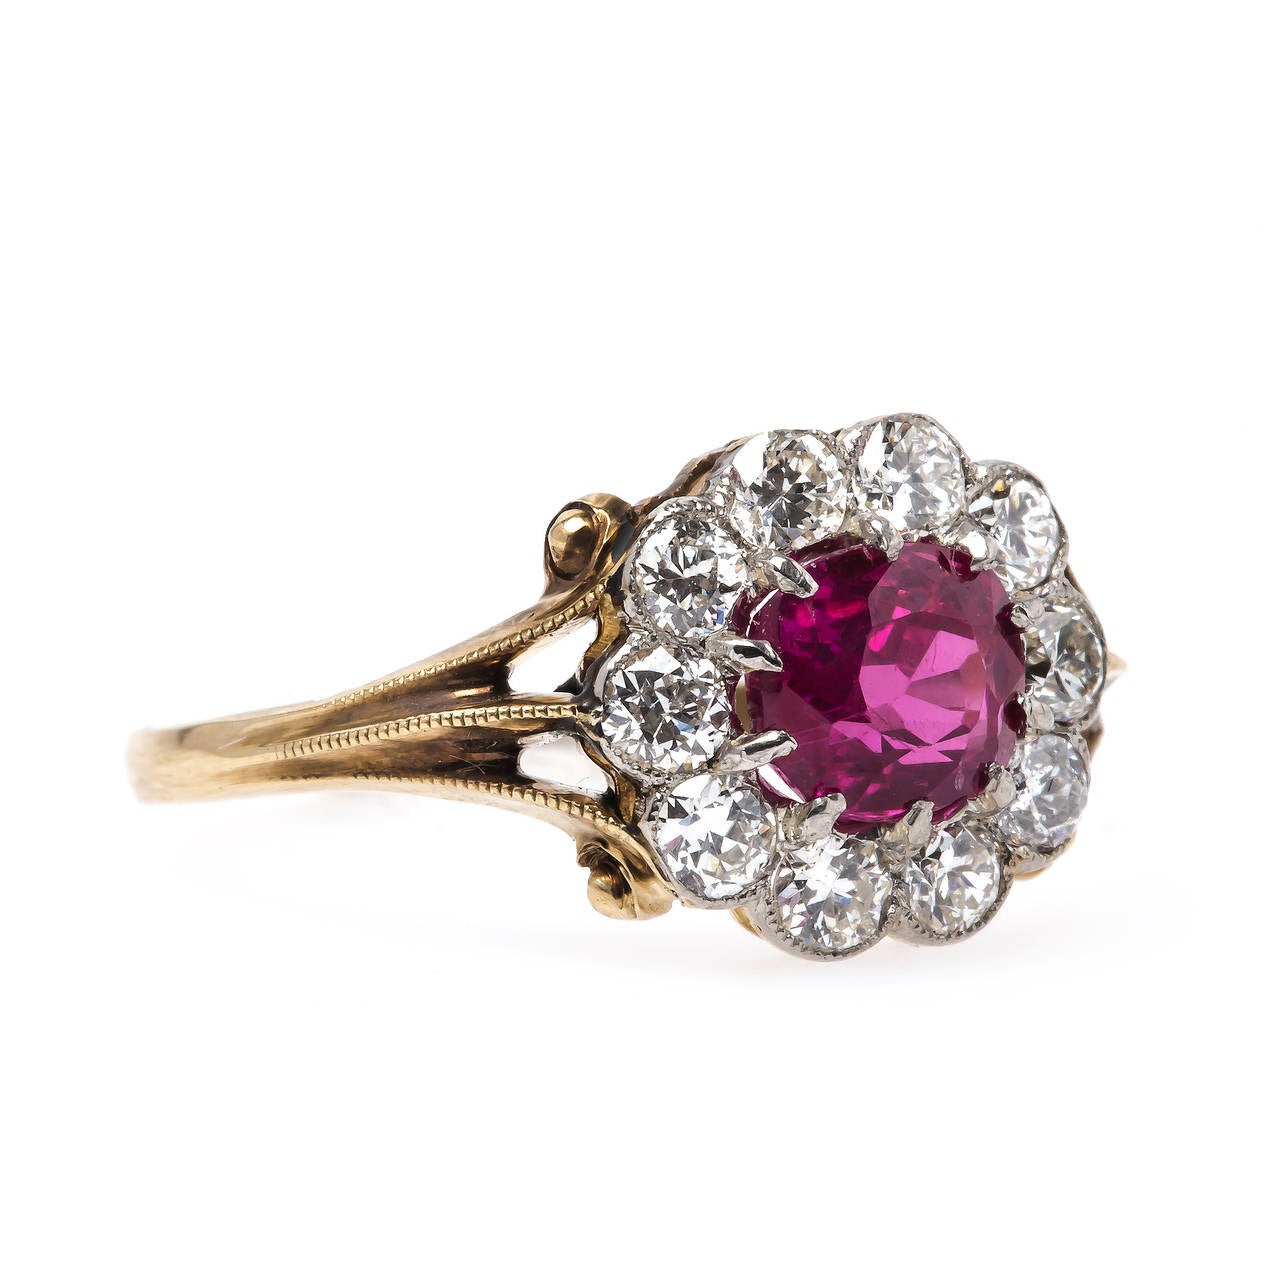 Lanesboro is a spectacular authentic Edwardian era (circa 1910) platinum topped 14k yellow gold ring complete with a T&H custom 14k yellow gold shank. The ring centers a ten-prong set oval natural ruby accompanied with a Guild Laboratories